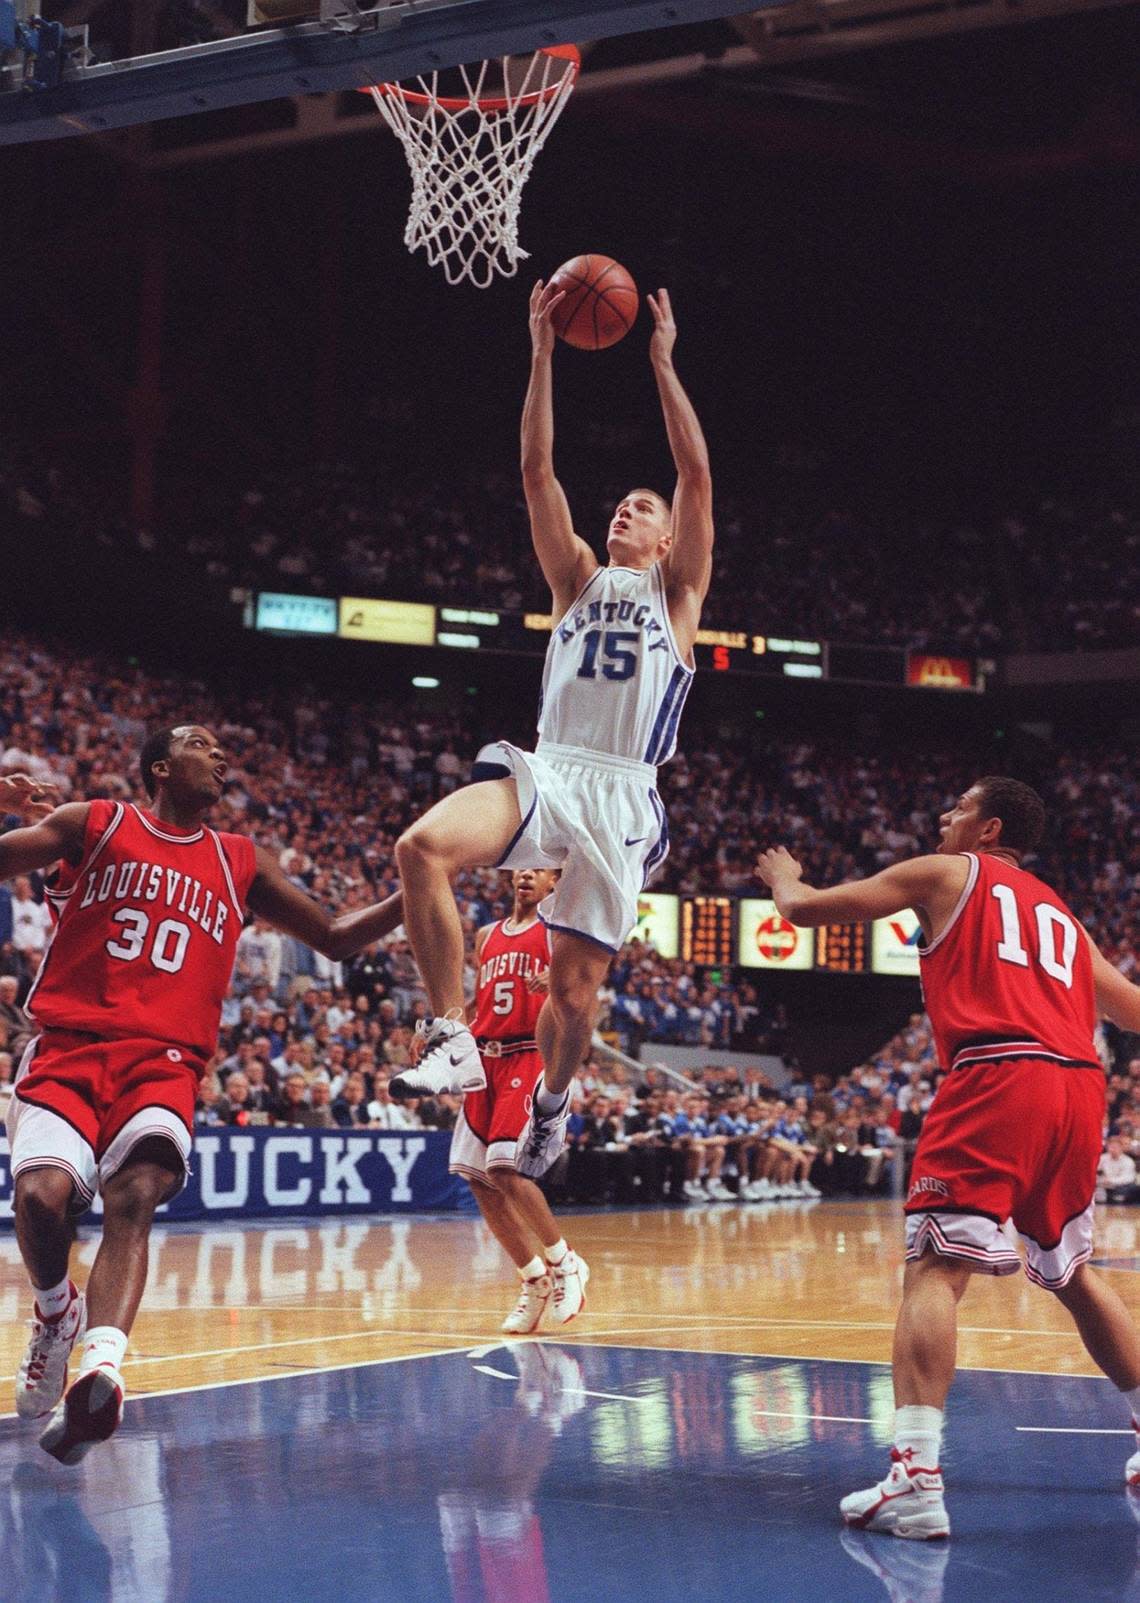 Jeff Sheppard (15), the father of current Kentucky freshman star Reed Sheppard, led UK with 18 points when the 1997-98 Wildcats were stunned 79-76 by Louisville at Rupp Arena. That season, the Wildcats went on to win the NCAA title, while the Cardinals finished 12-20. LEXINGTON HERALD LEADER